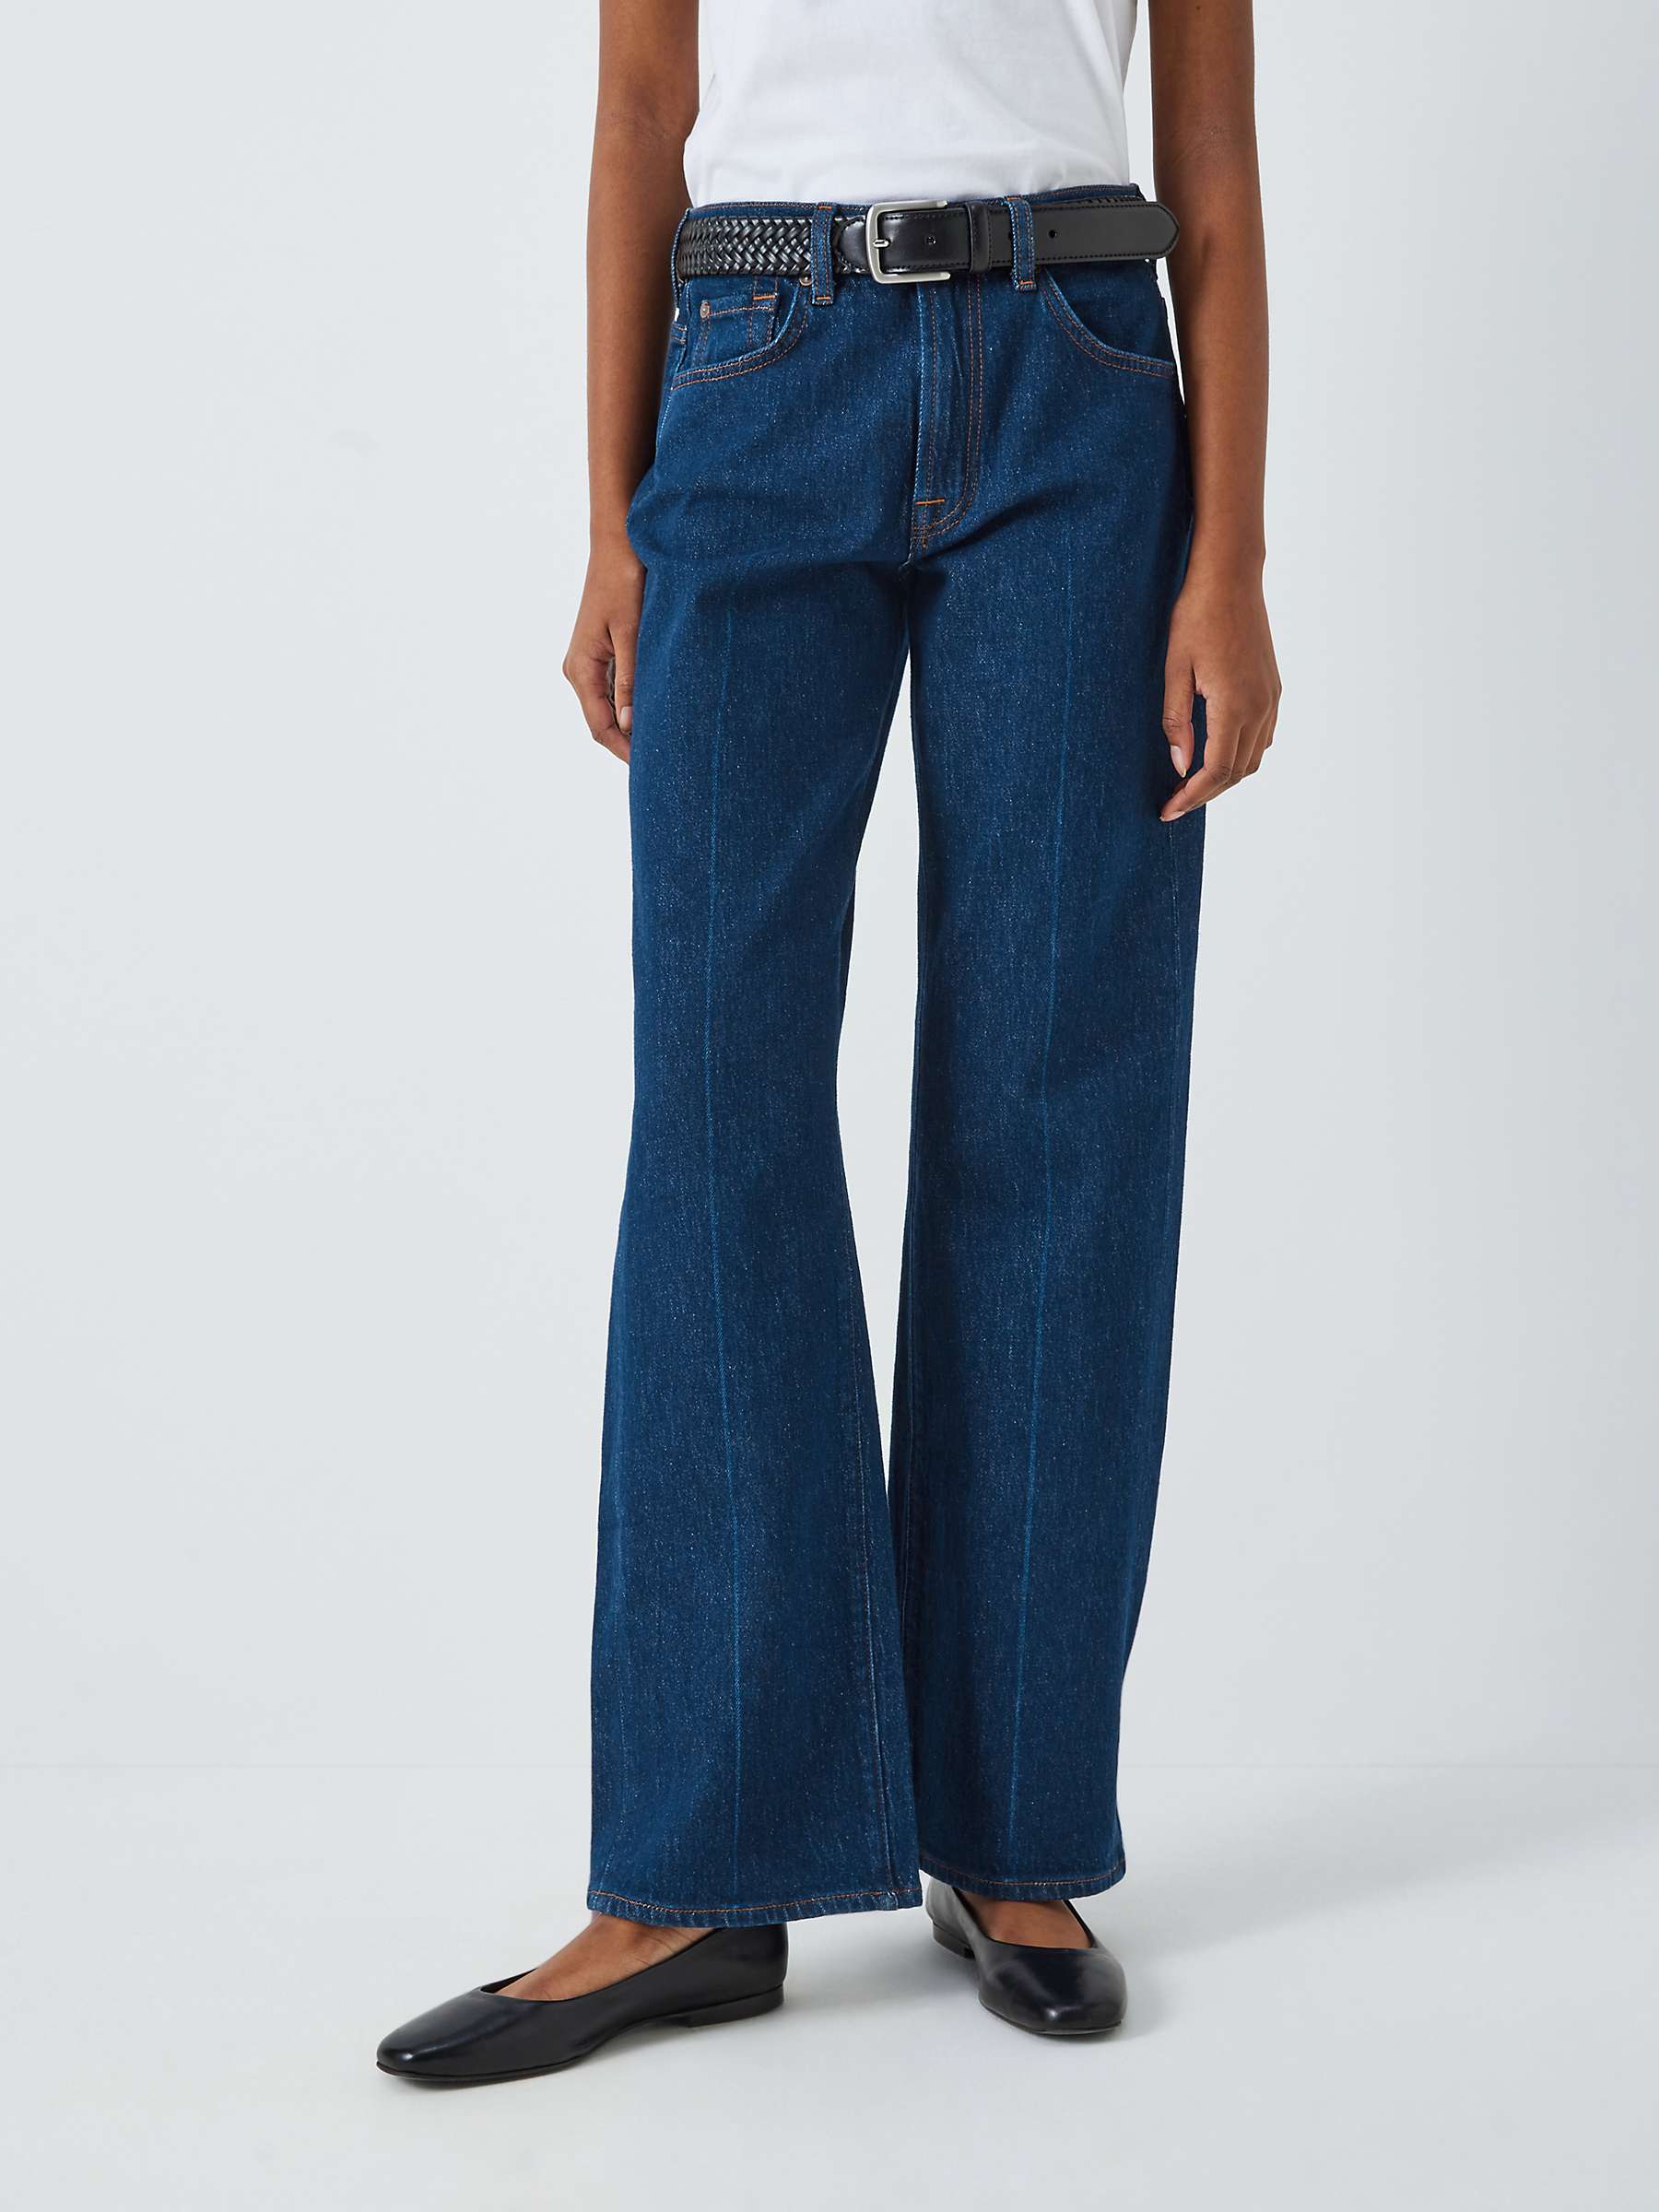 Buy 7 For All Mankind Lotta Luxe Vintage Flared Jeans, Dark Blue Online at johnlewis.com